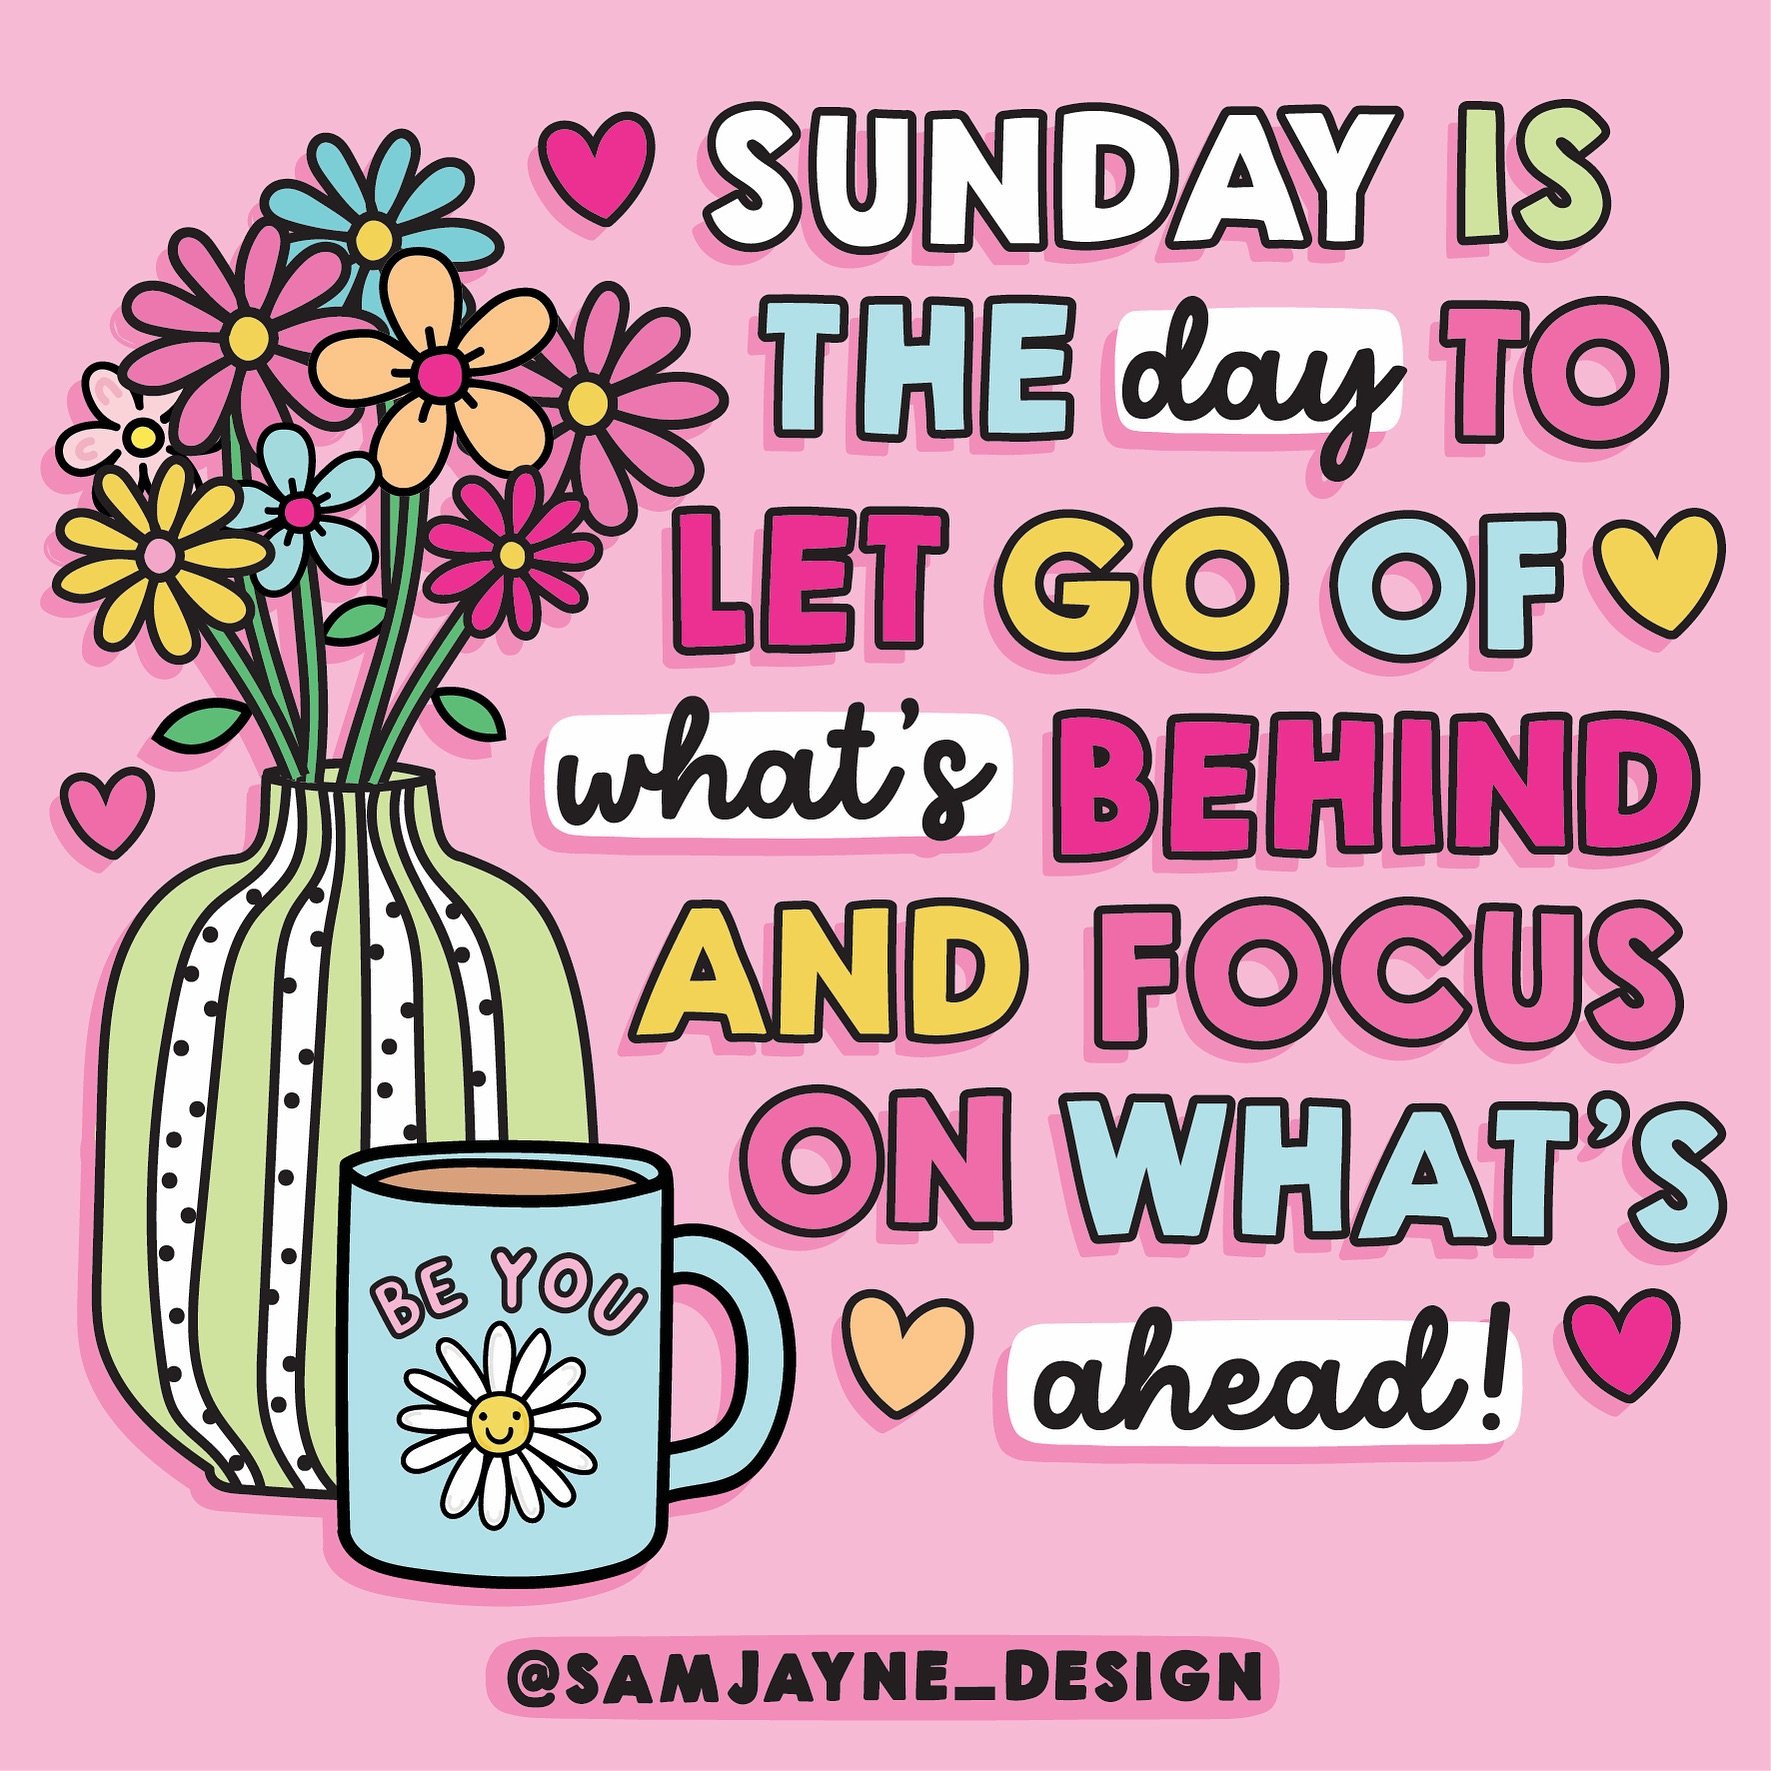 Happy Sunday everyone 😊💖 Hope this artwork inspired you to leave whatever happened this week behind, enjoy today and look forward to next week! 🙌🏼

#cuteartwork #cuteartstyle #brightcolours #goodvibes #mentalhealthquote #funartwork #dailyreminder